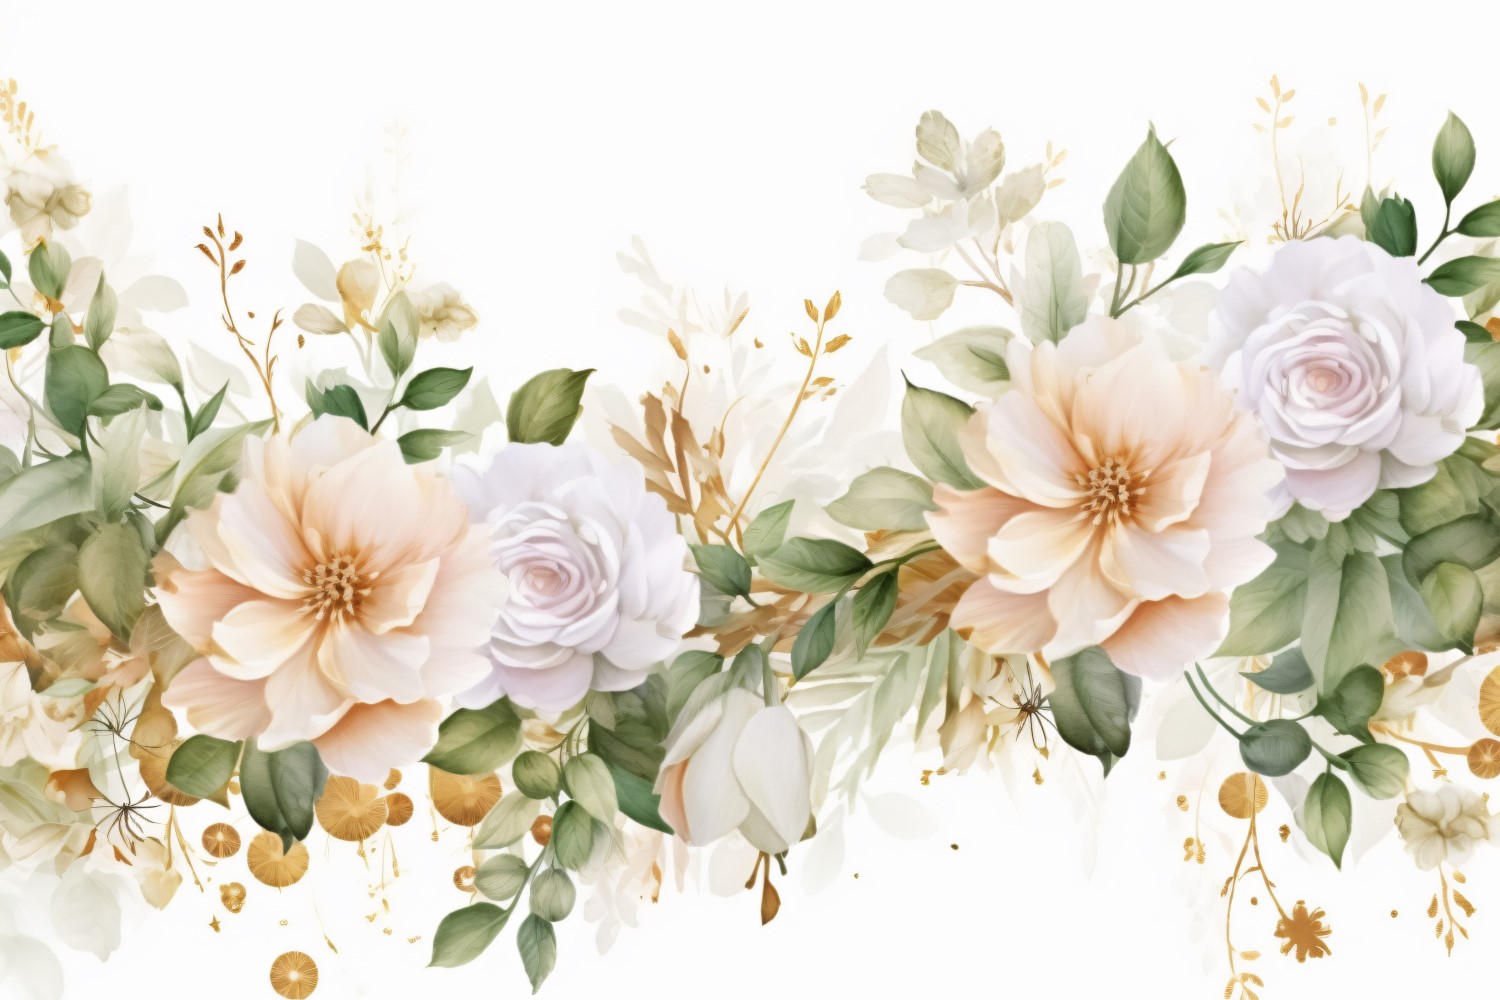 Watercolor flowers Background 483